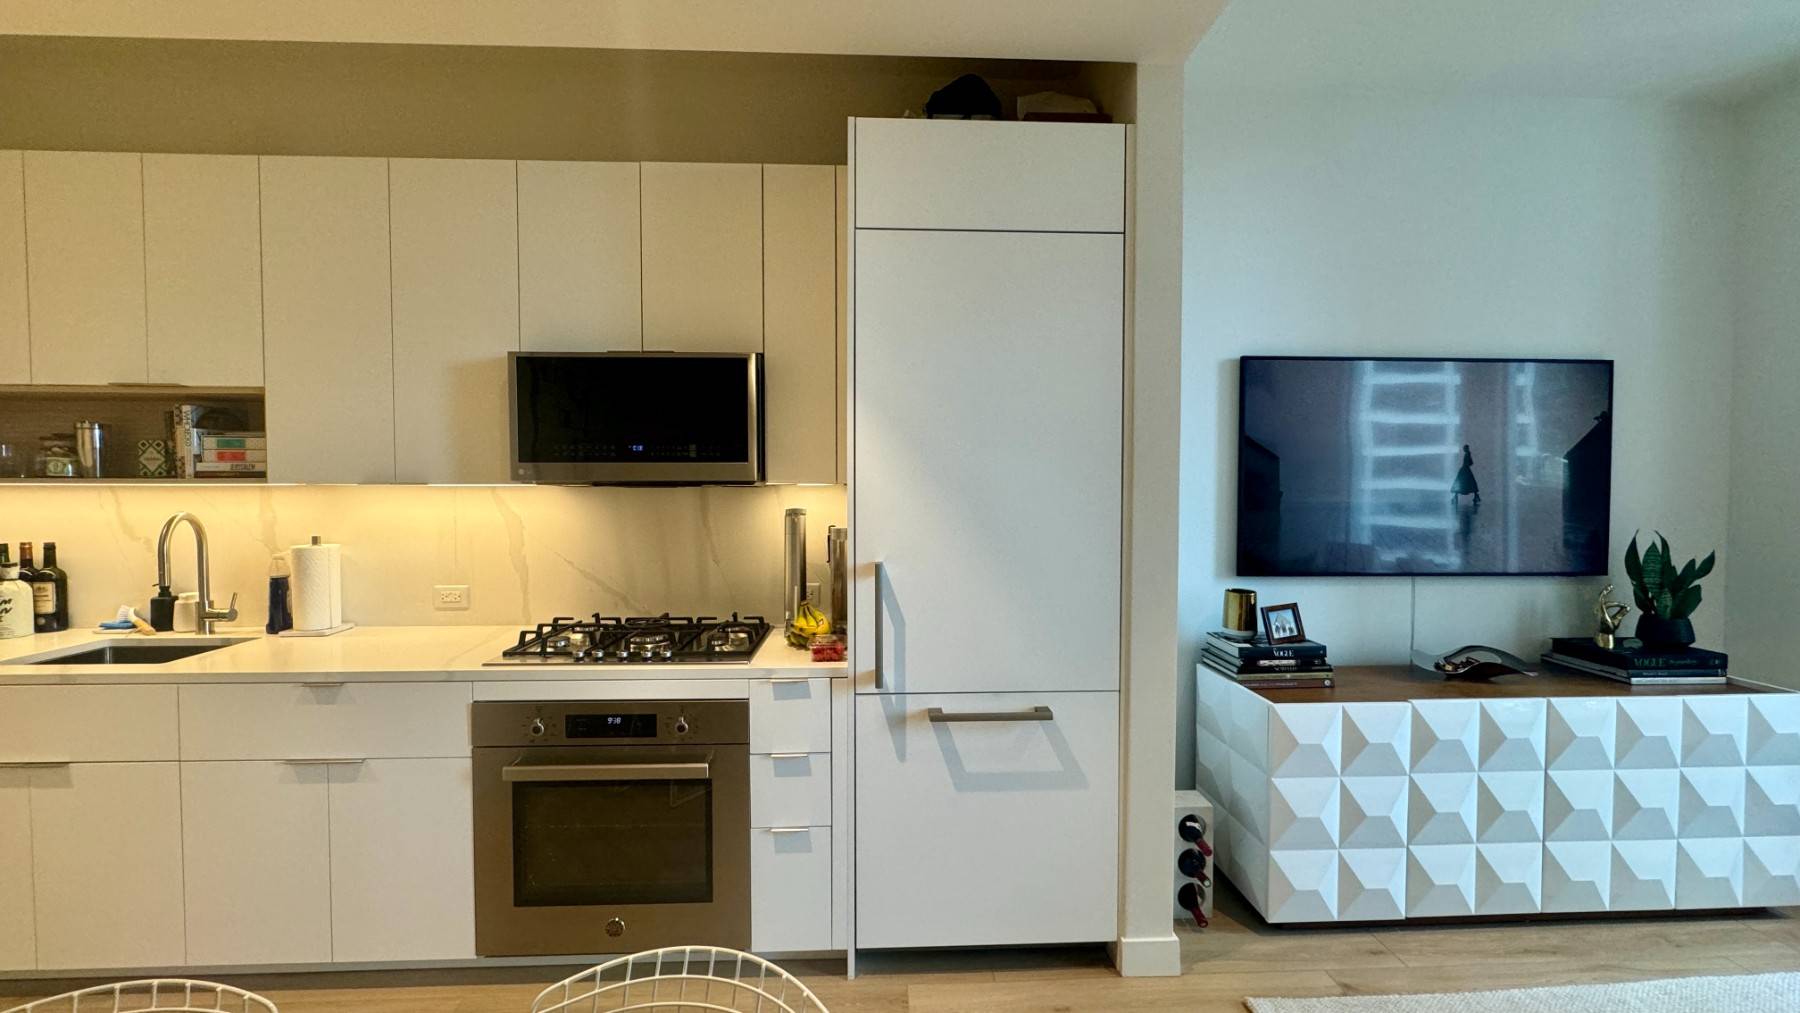 Stunning brand new 1 Bed 1 bath W D in unit condo finishing located in the best rental building in FiDi.